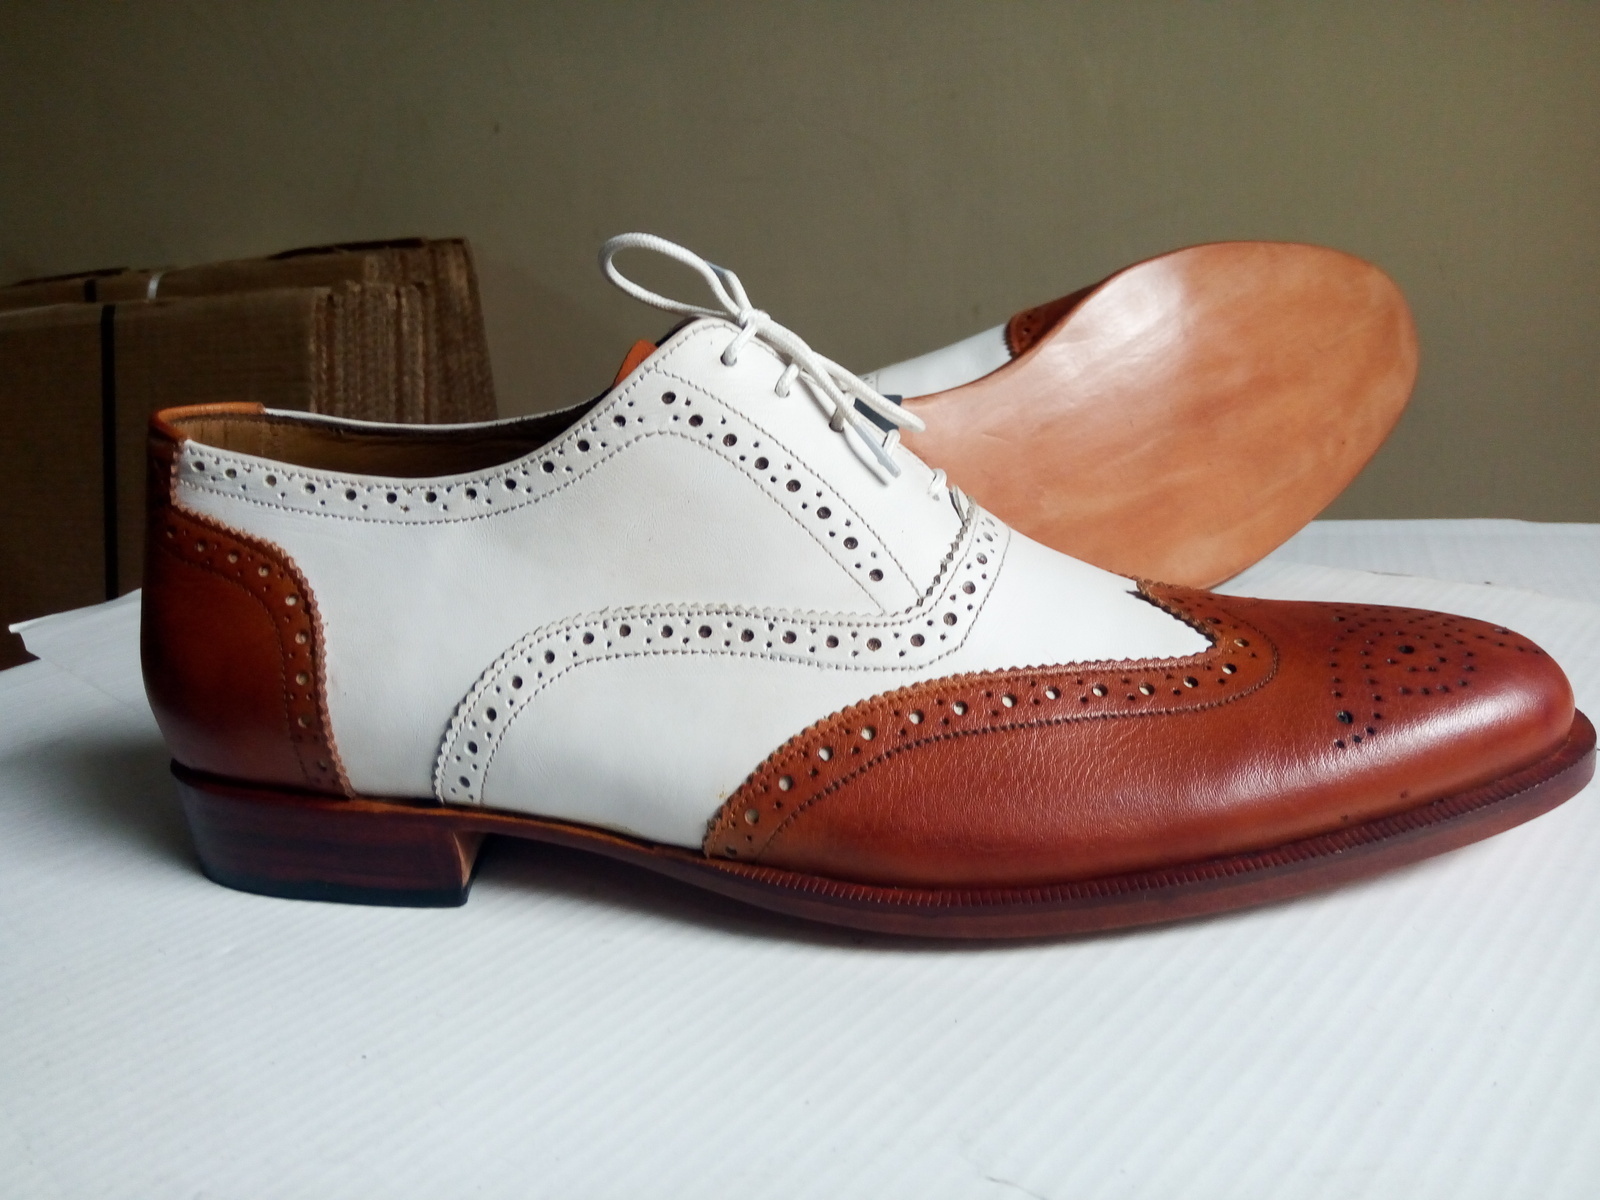 New Handmade Men Oxford Shoes, White Brown Wing Tip Leather Formal Tuxedo Shoes